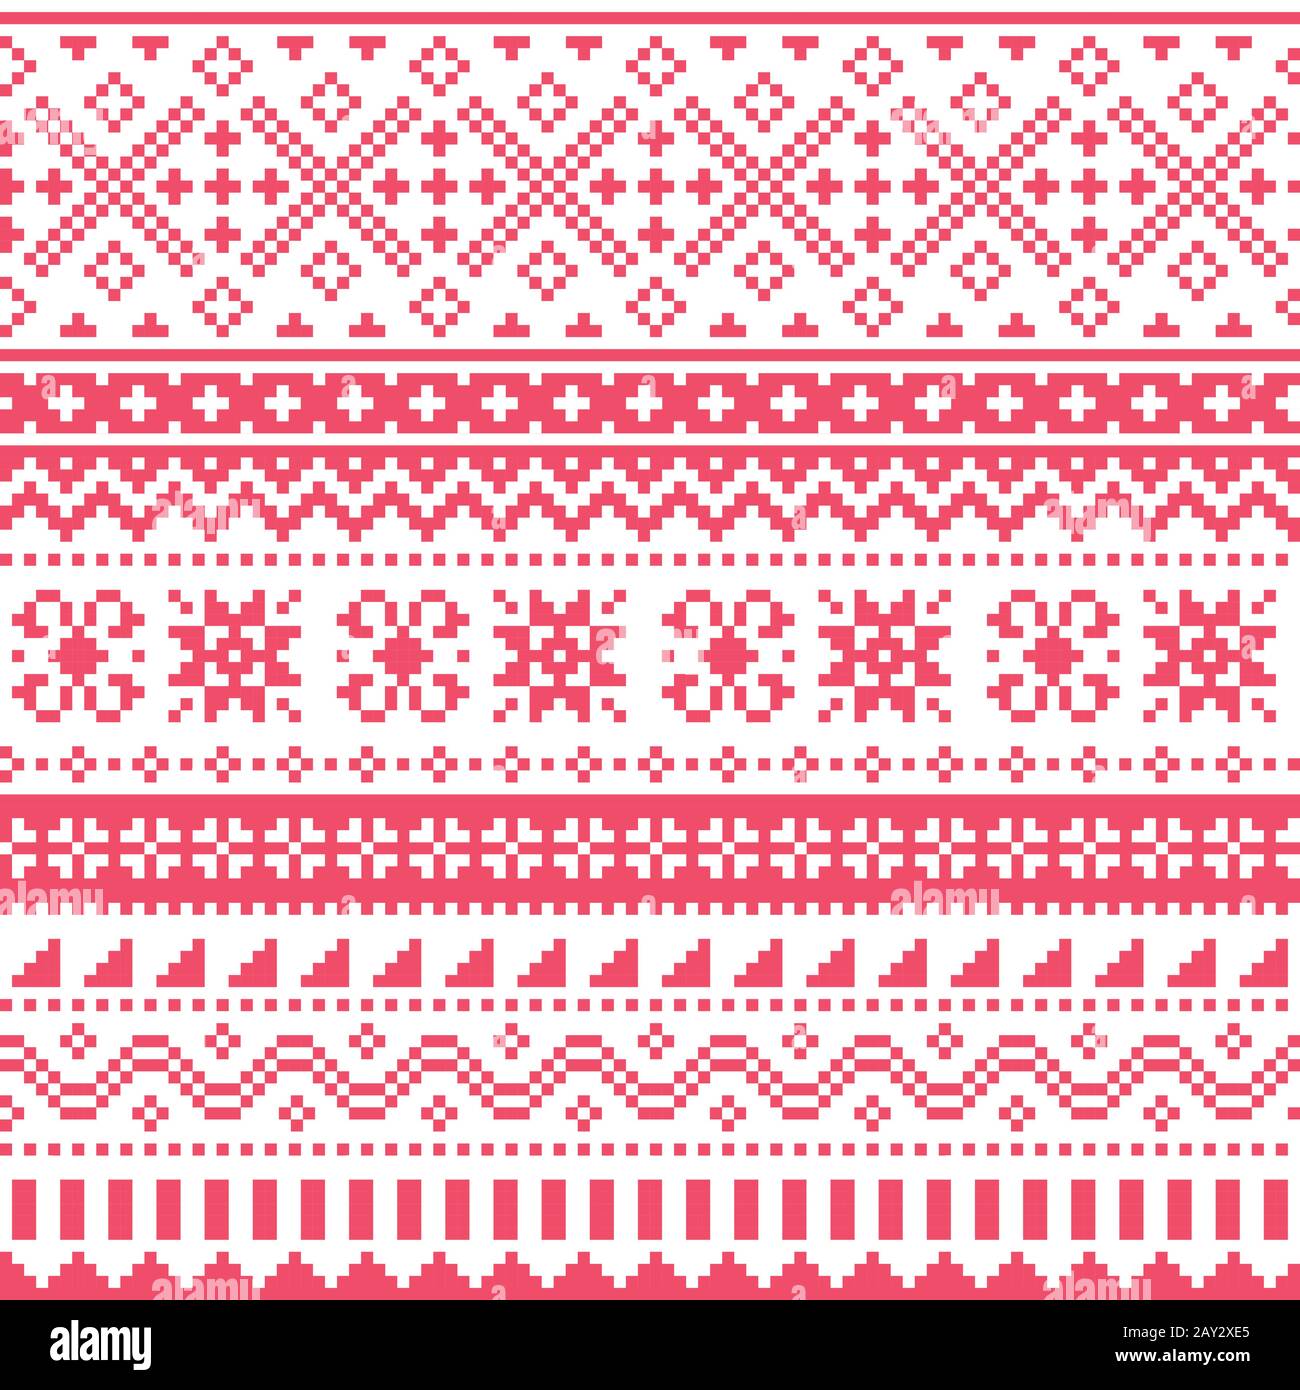 Scottish Fair Isle style traditional knit vector seamless pattern, Shtelands knitwear repetitive design Stock Vector